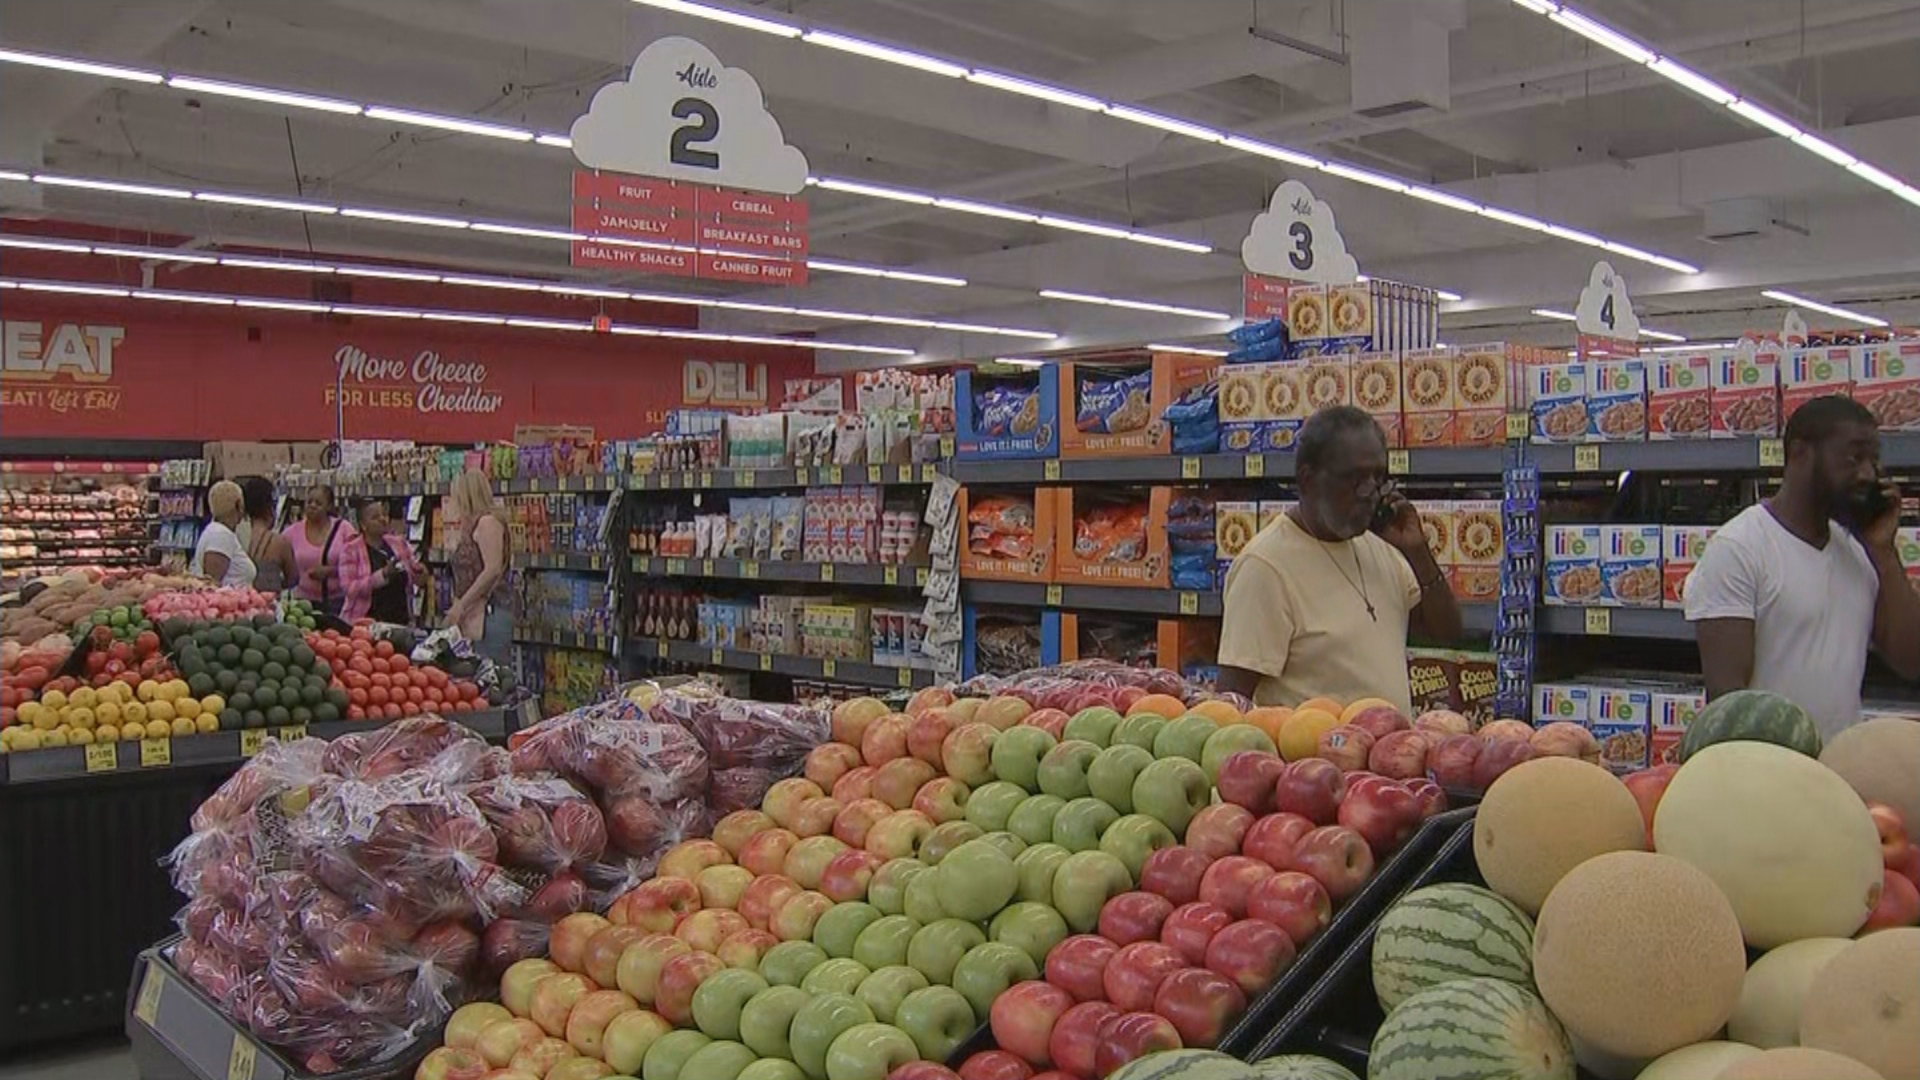 Grocery Outlet Bargain Market Opens In Sharswood Food Desert To Fill Community Needs